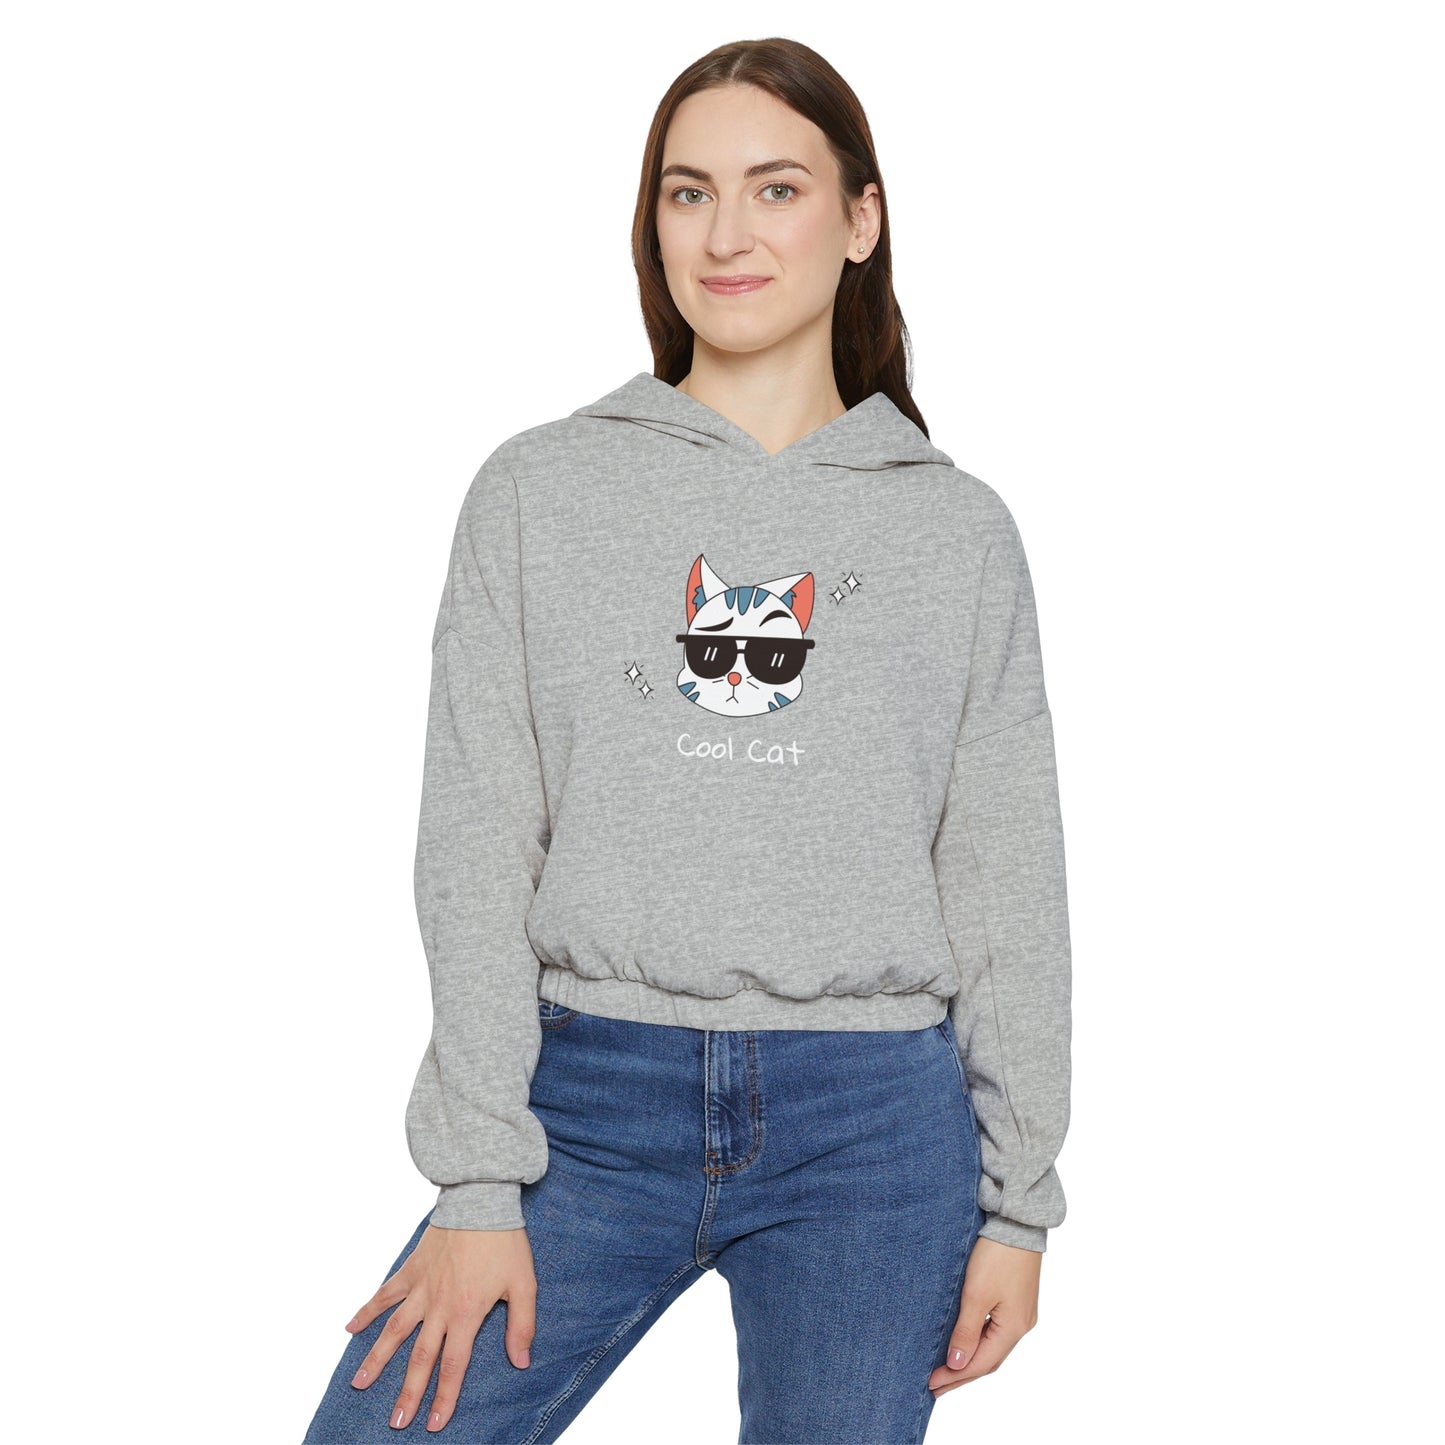 Coco The Coolest Cat I Know.  Women's Cinched Bottom Hoodie